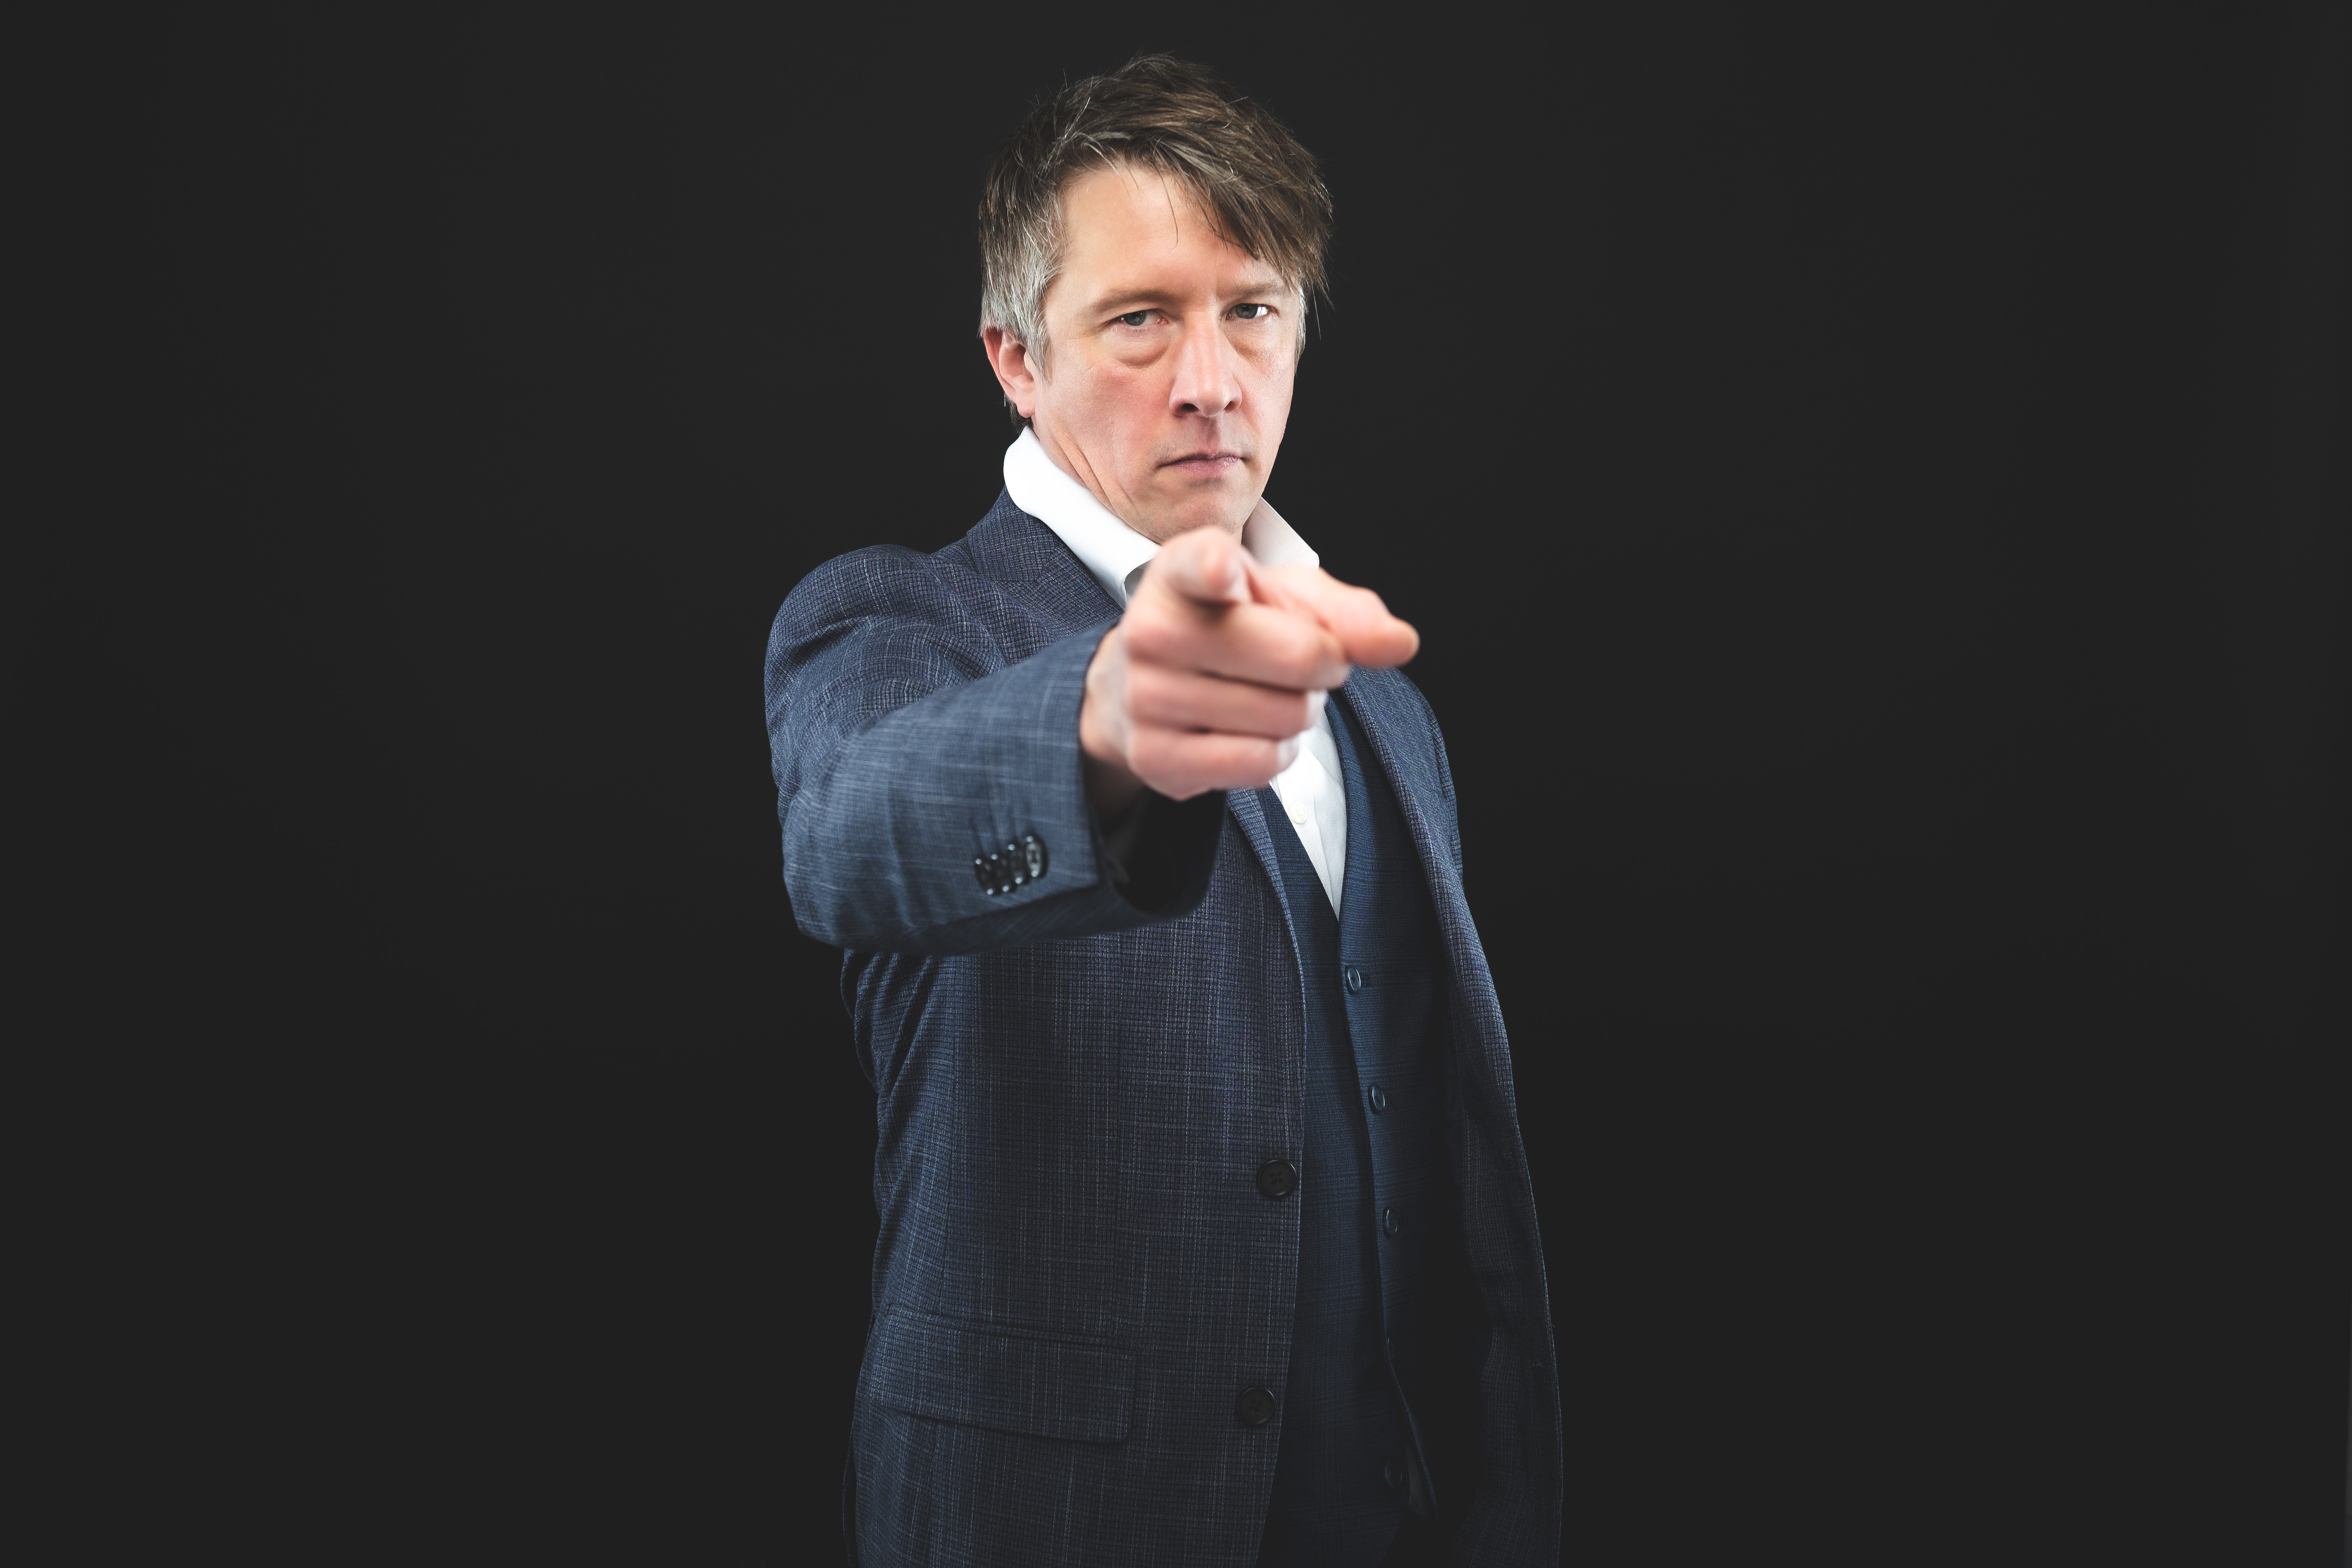 Jonathan Pie creator Tom Walker points and looks at the camera while standing in front of a black background